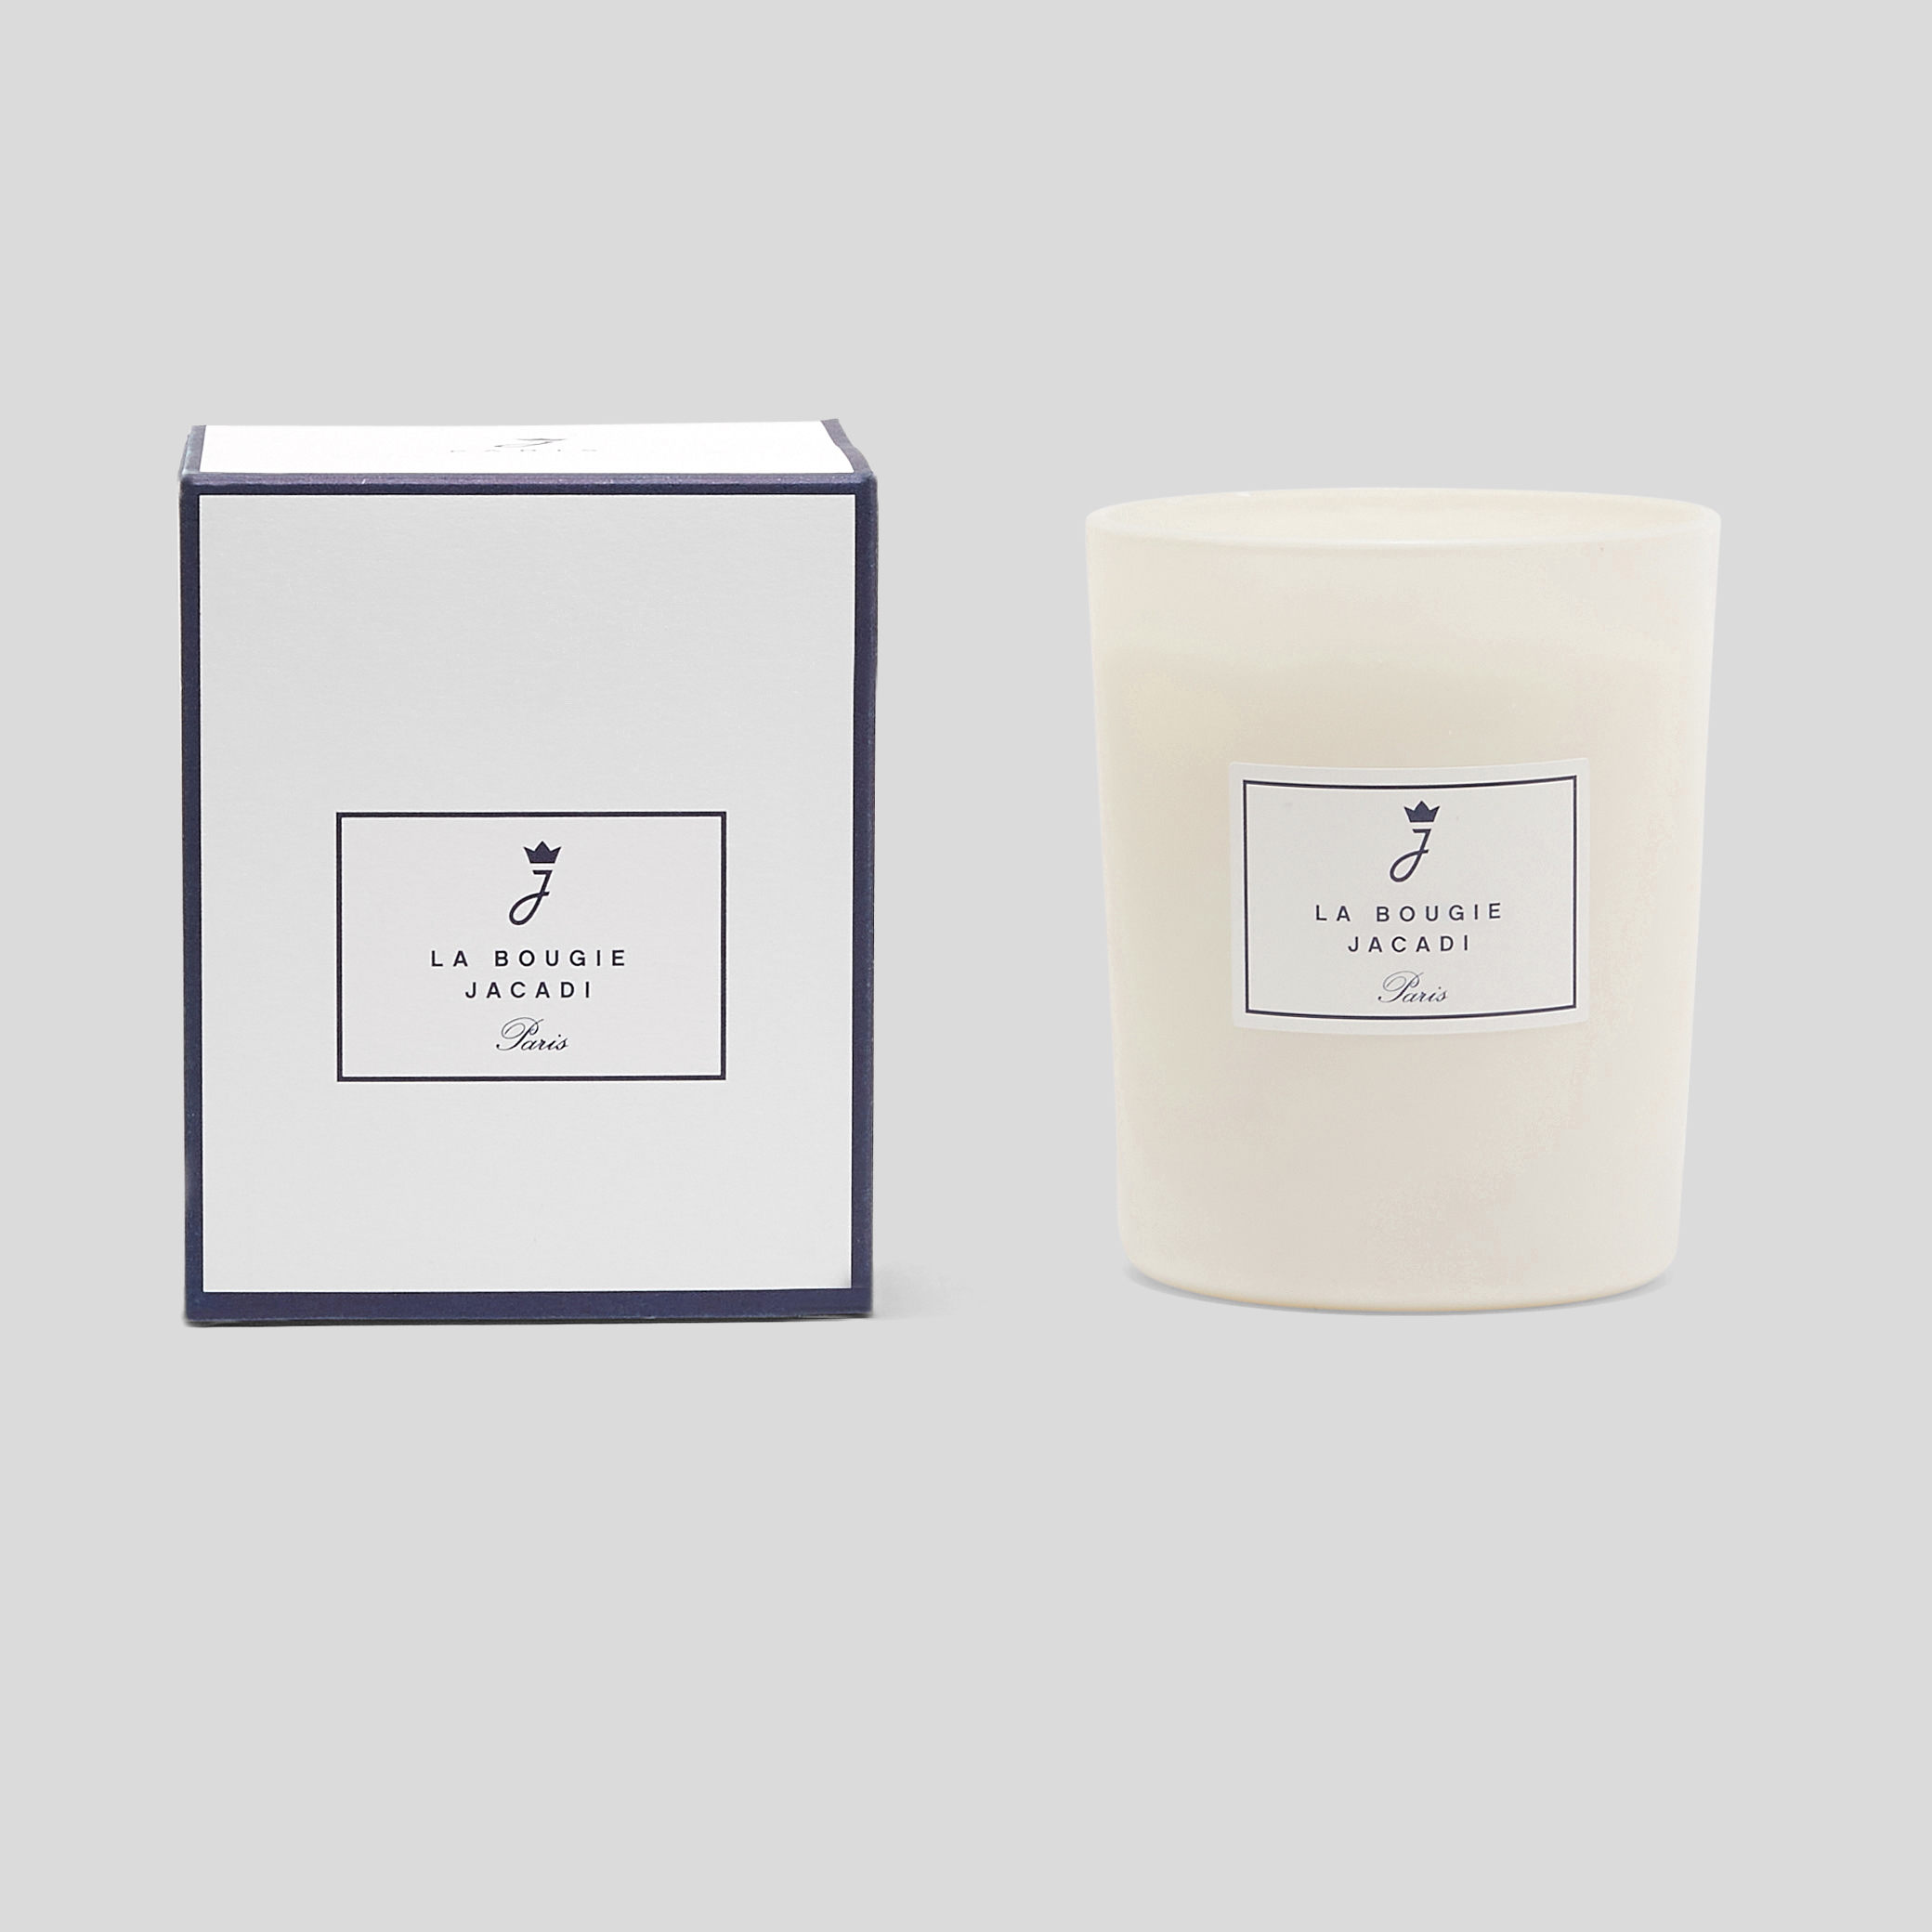 Large-sized scented candle in Jacadi Cologne fragrance.